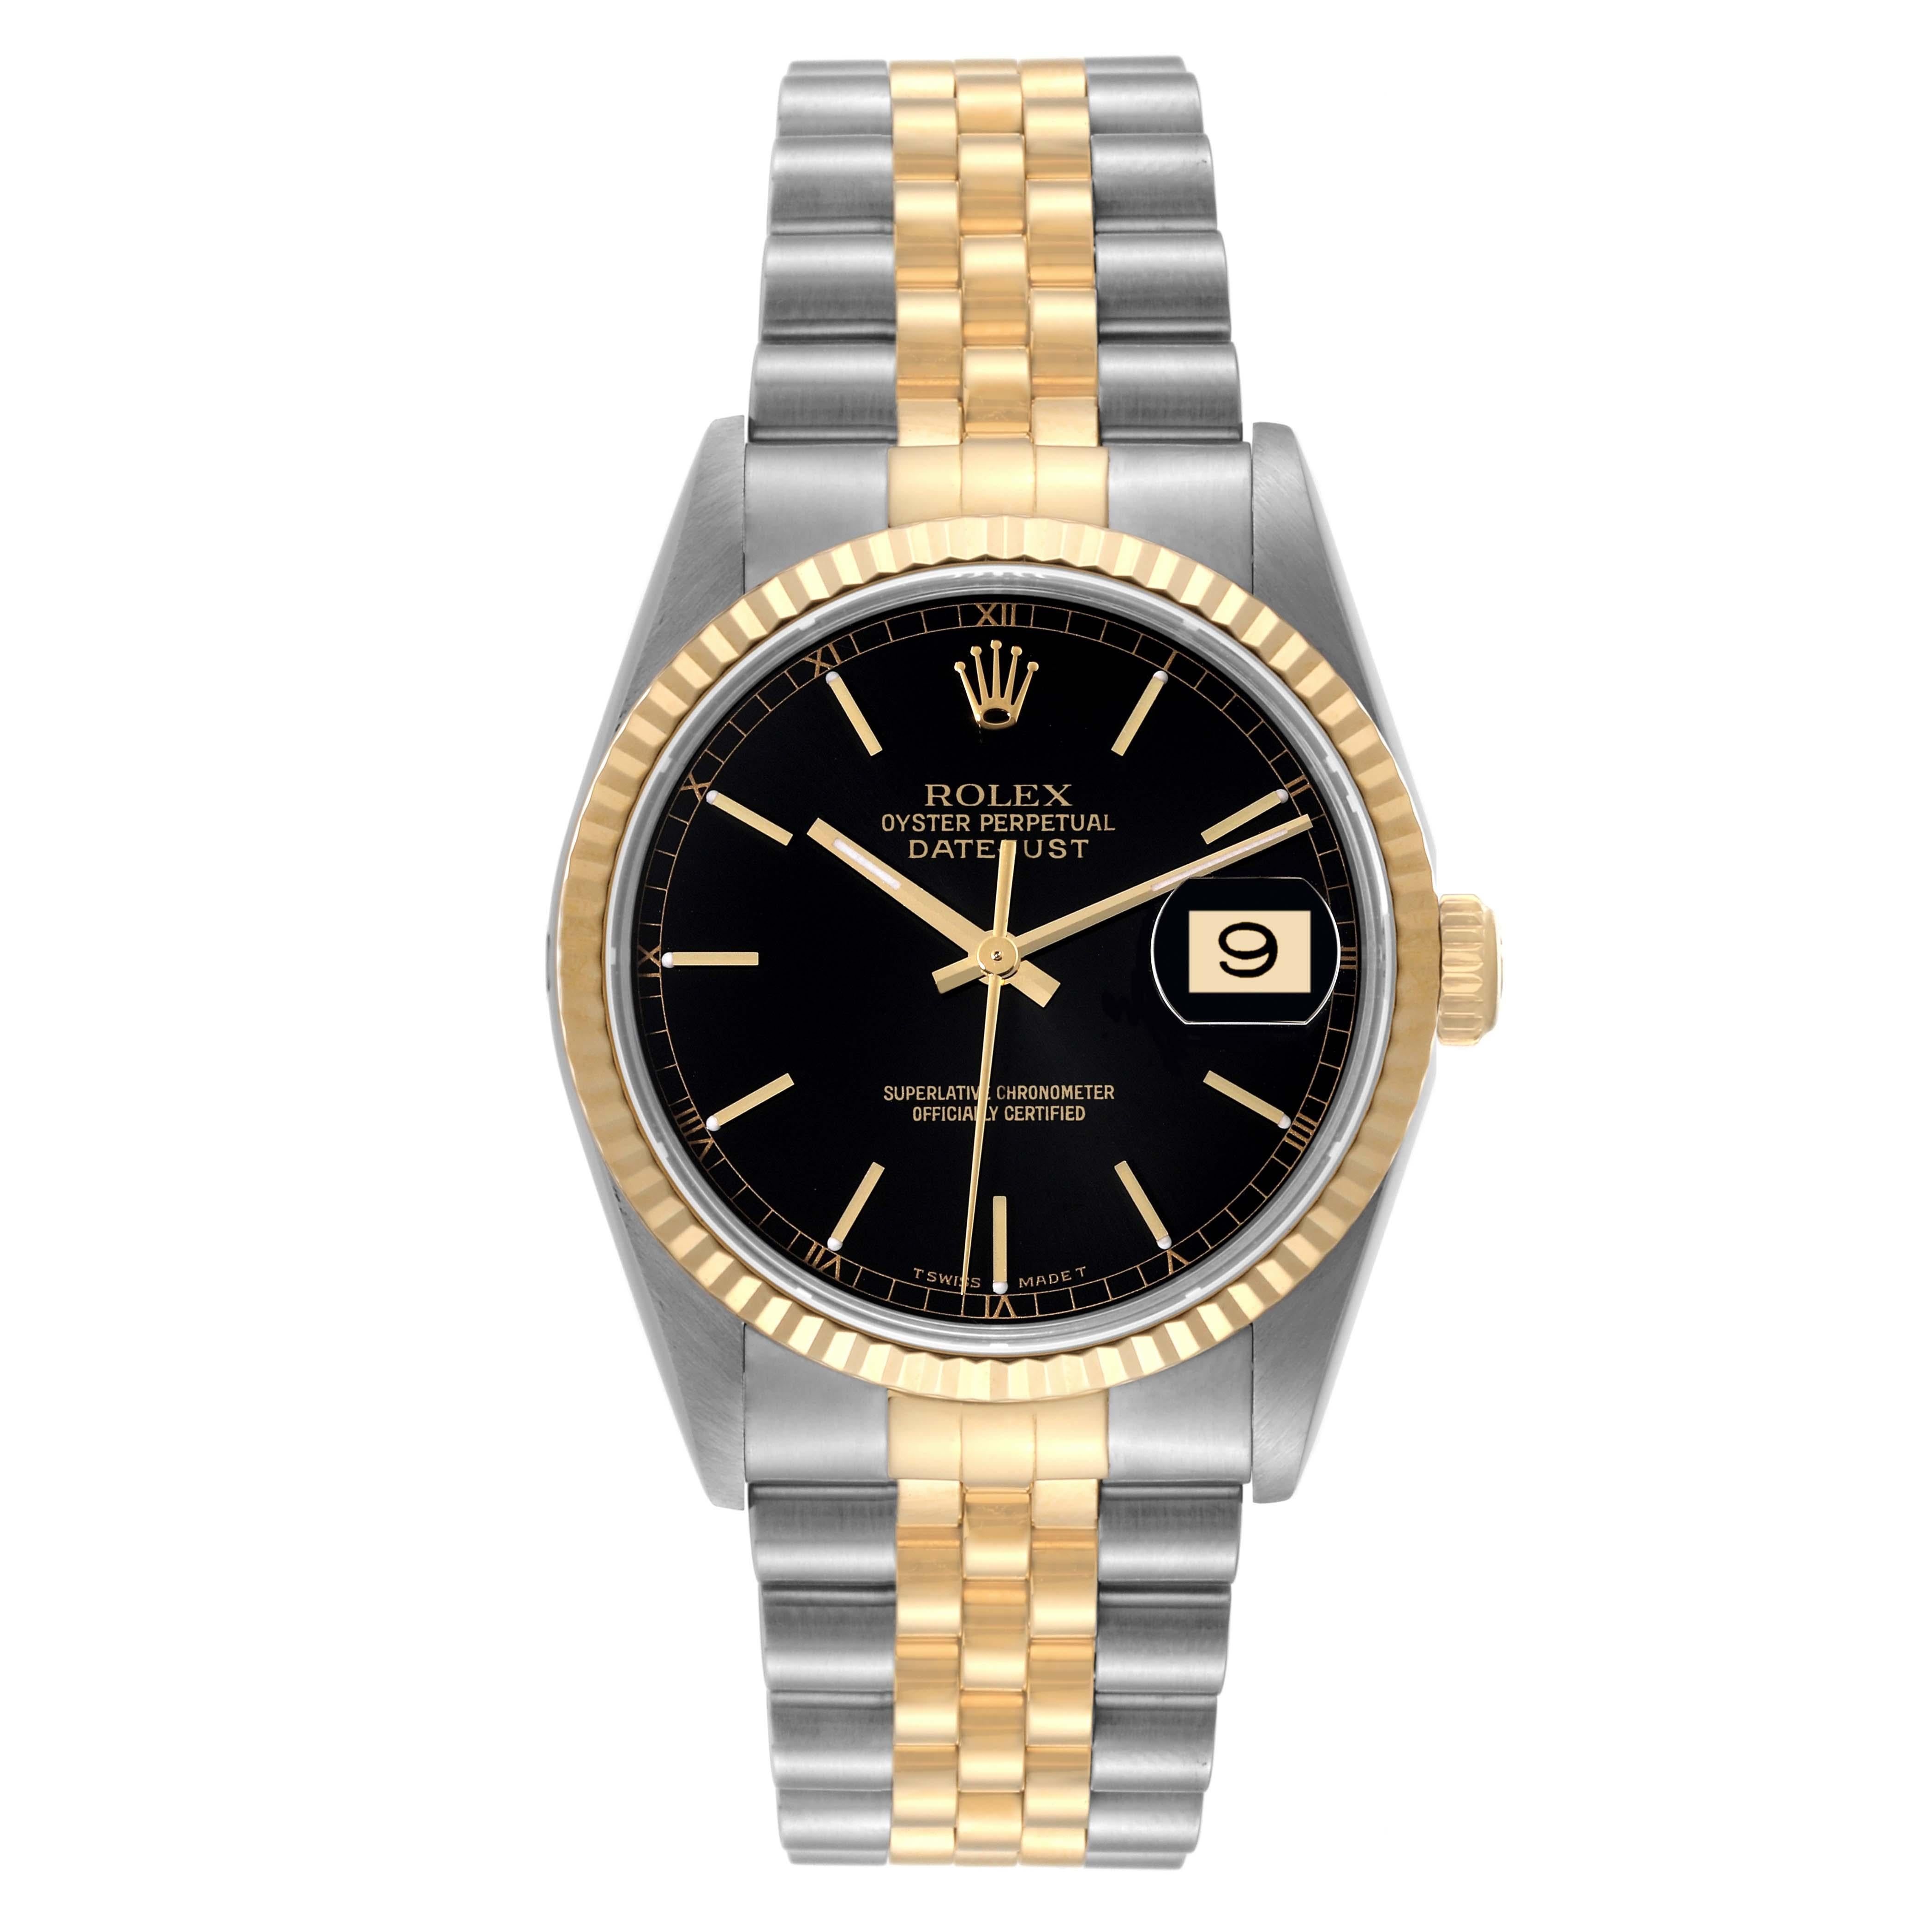 Rolex Datejust Steel Yellow Gold Black Dial Mens Watch 16233. Officially certified chronometer automatic self-winding movement. Stainless steel case 36 mm in diameter.  Rolex logo on an 18K yellow gold crown. 18k yellow gold fluted bezel. Scratch